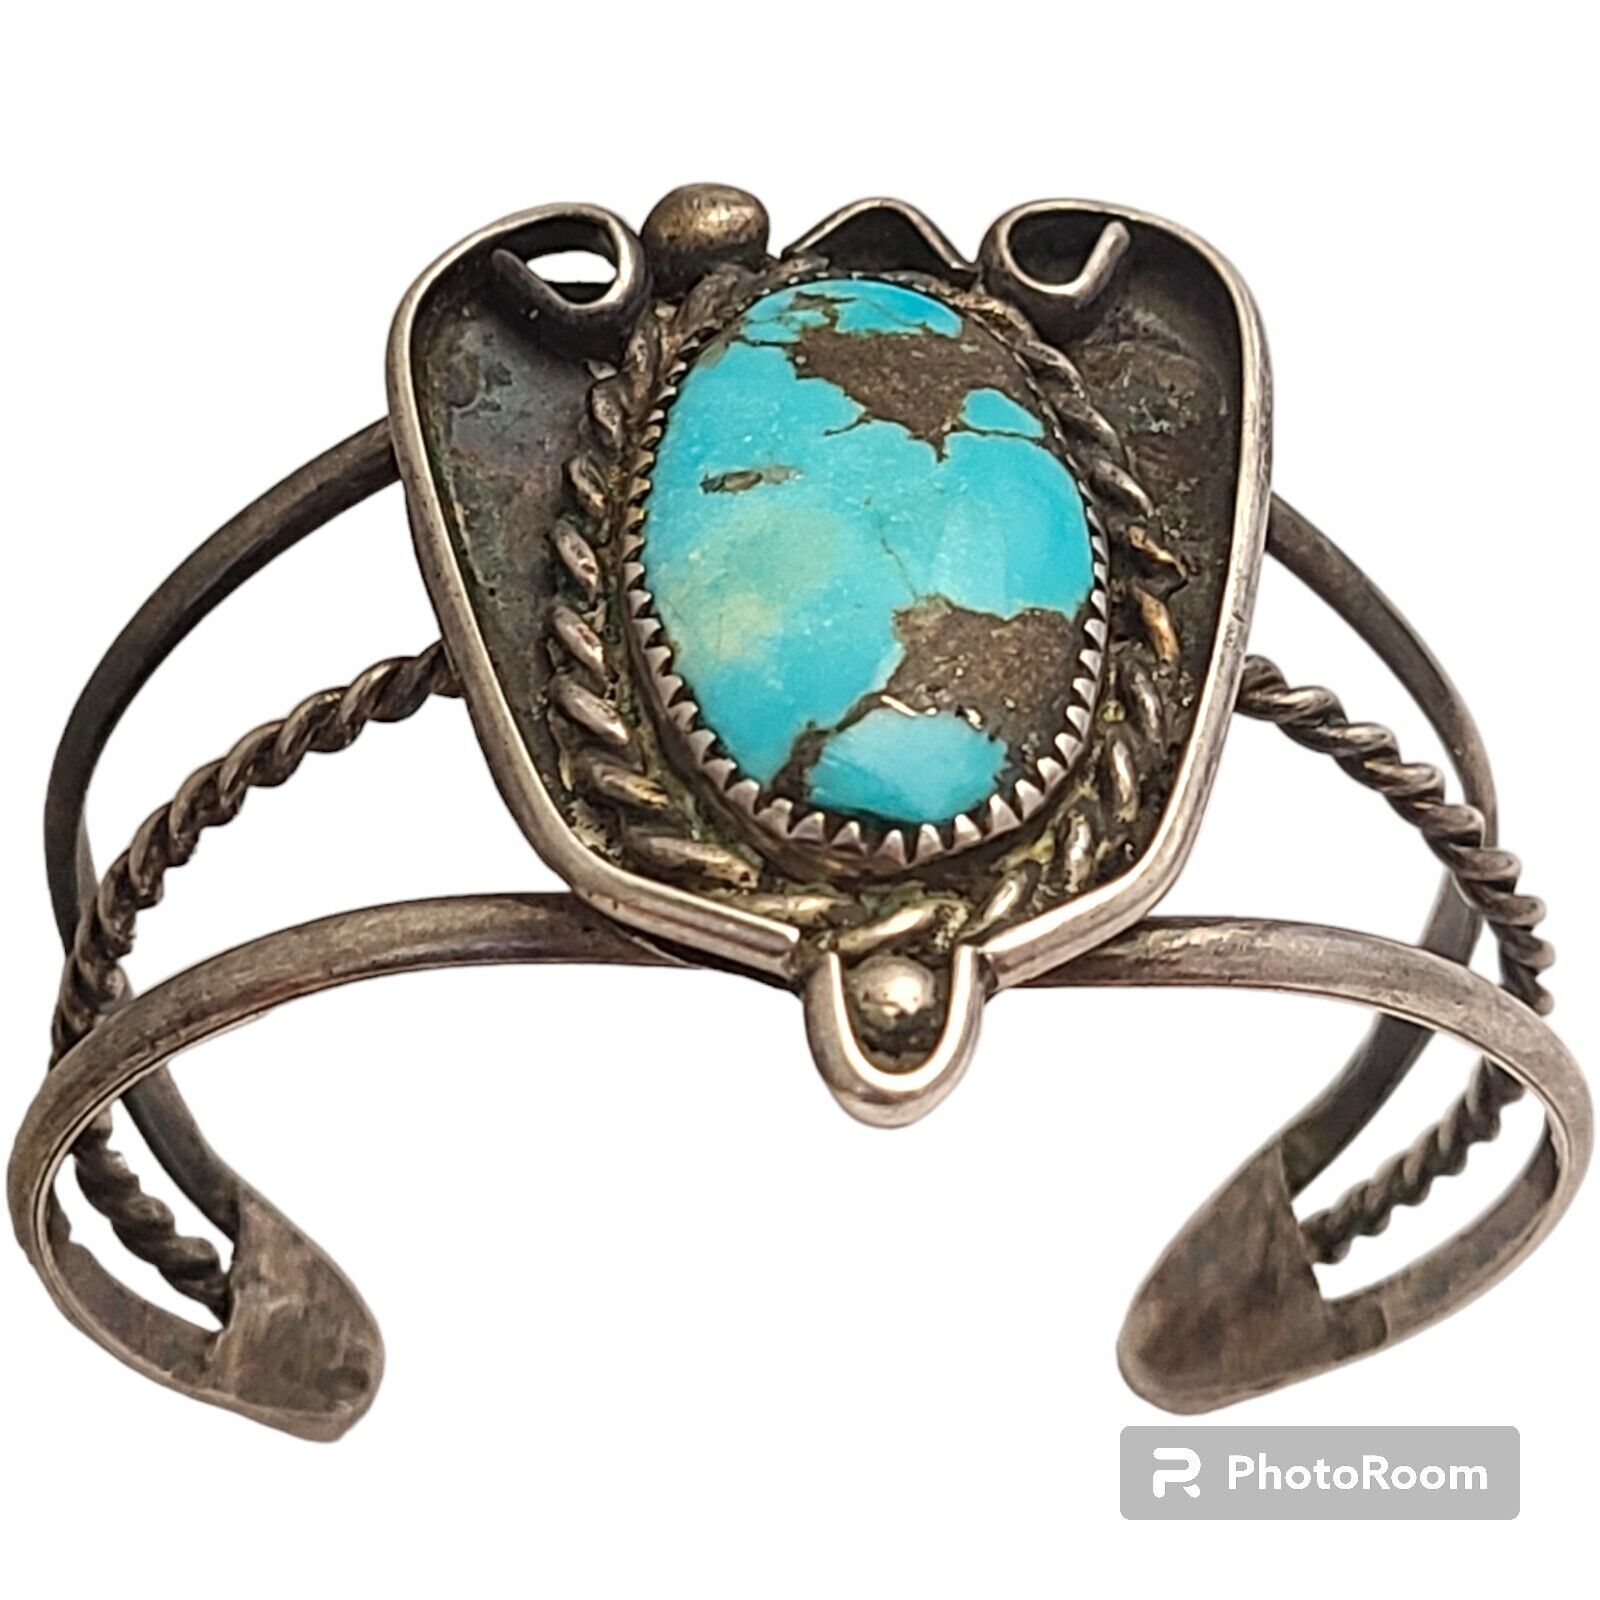  Hector Chato Morenci TURQUOISE VINTAGE NATIVEAMERICAN STERLING SILVER BRACELET 